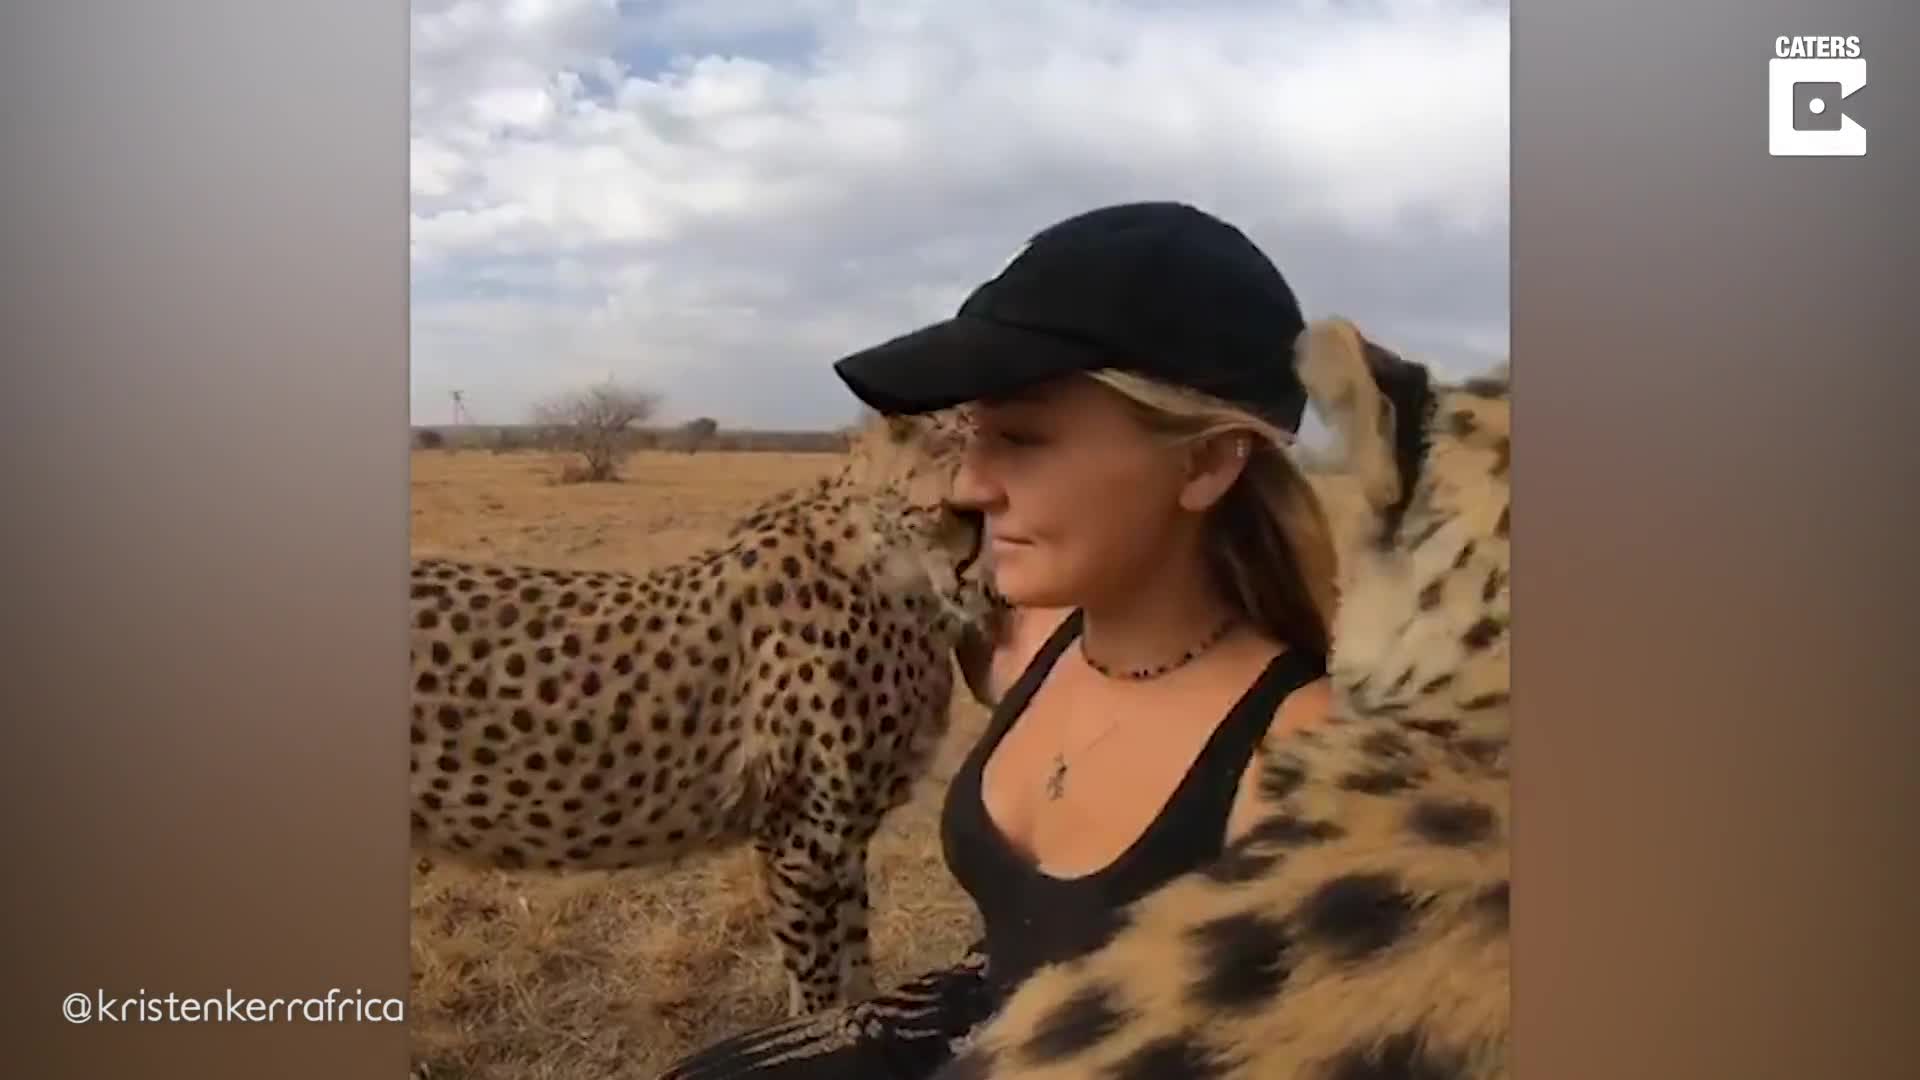 REAL LIFE DR DOLITTLE – STUNNING WOMAN RAISED WITH AFRICA’S BIG CATS NURSES HUGE PREDATORS BACK TO HEALTH